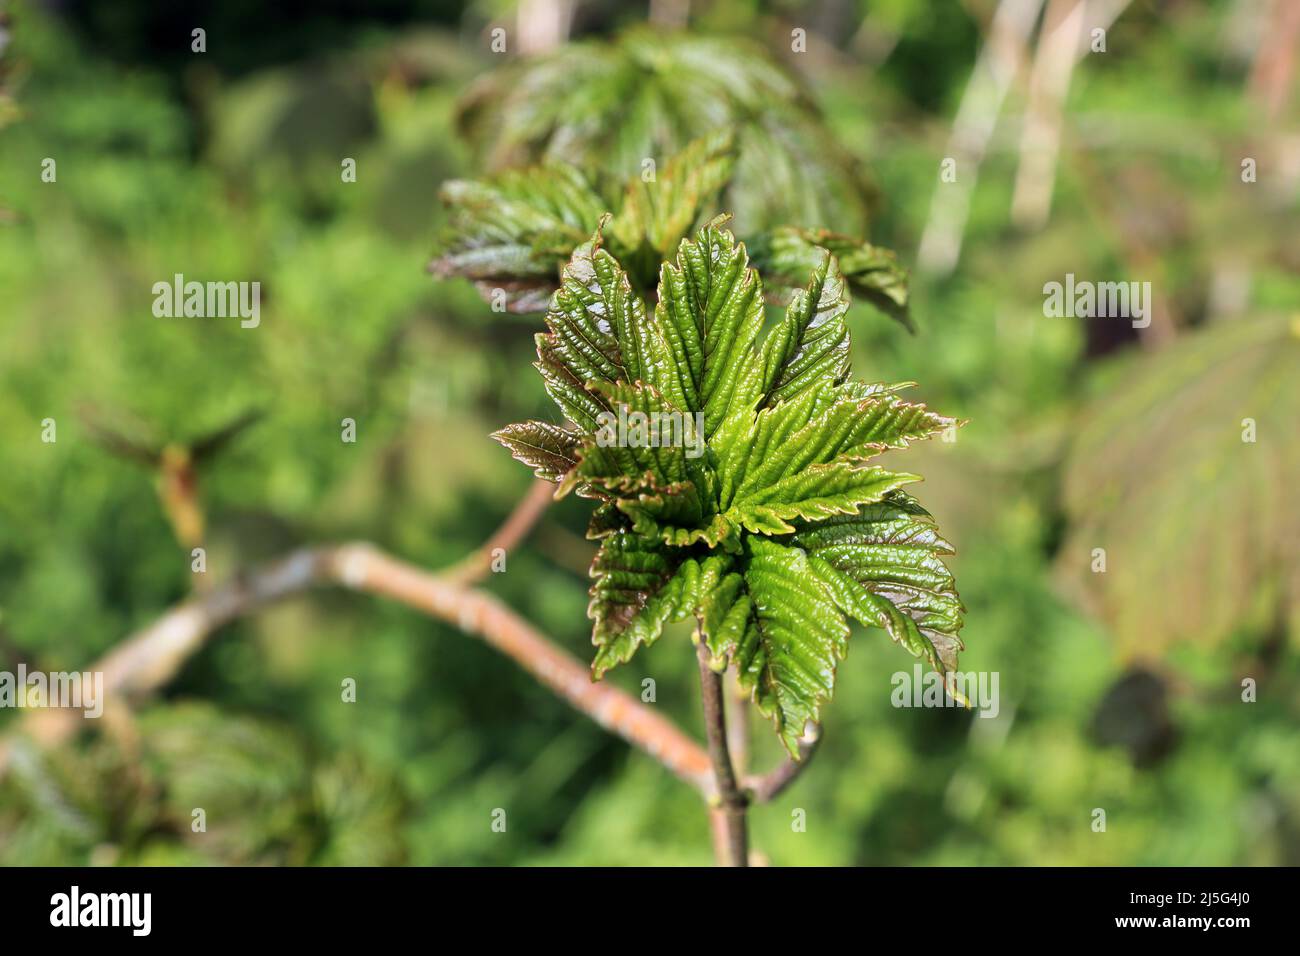 Young leaves of a sycamore tree in Spong Wood near Elmsted on the Kent Downs above Ashford, Kent, England, United Kingdom Stock Photo